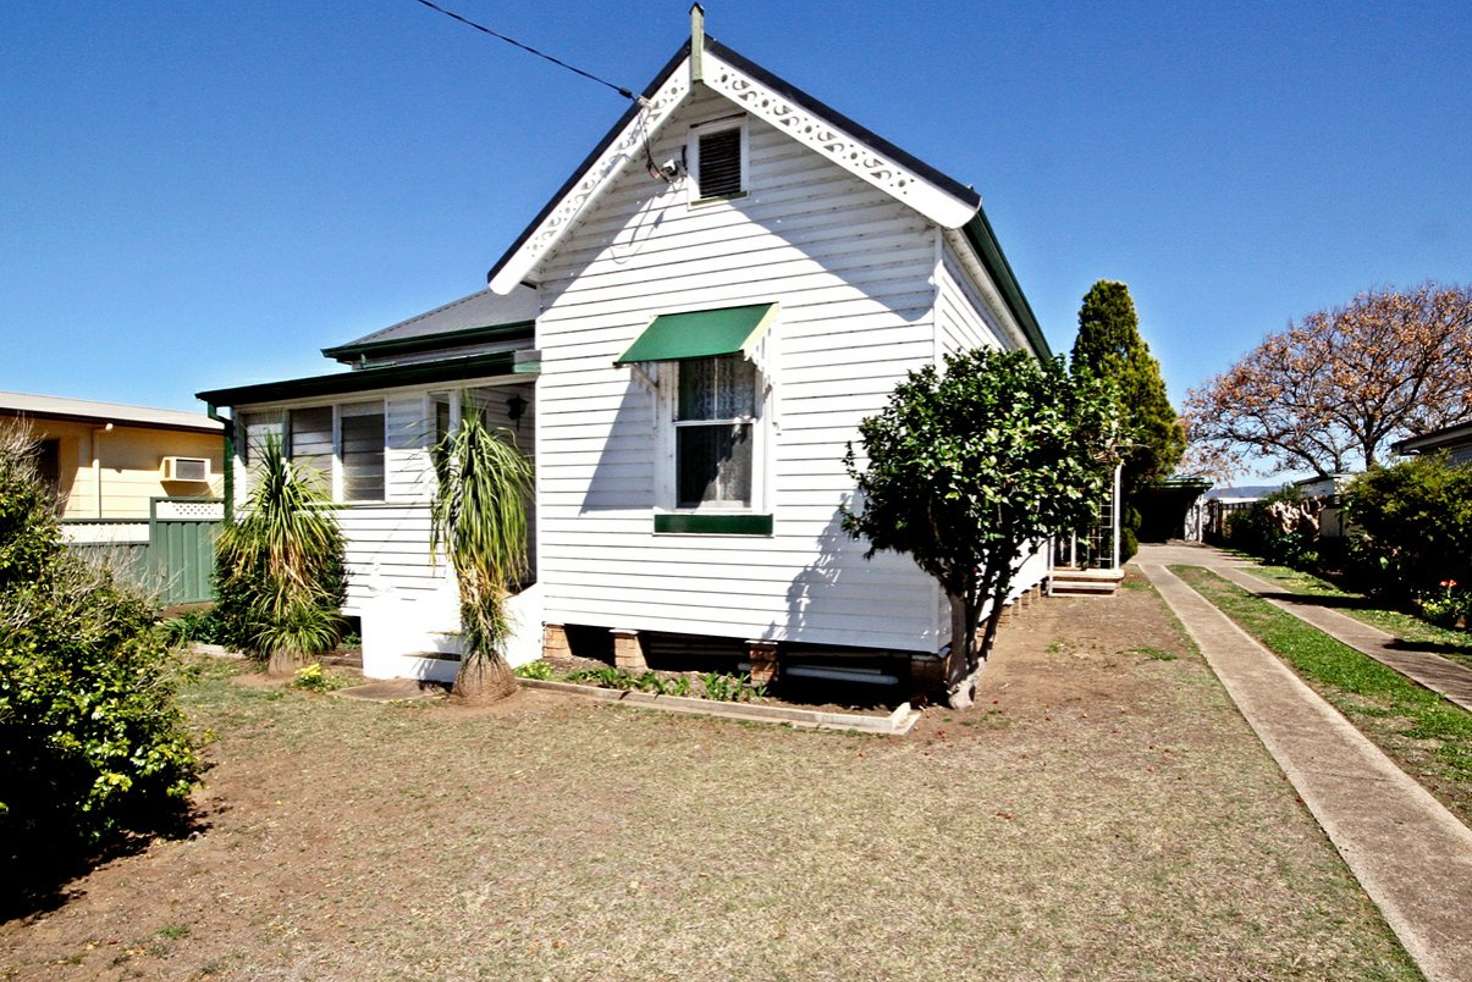 Main view of Homely house listing, 23 McAdam Street, Aberdeen NSW 2336